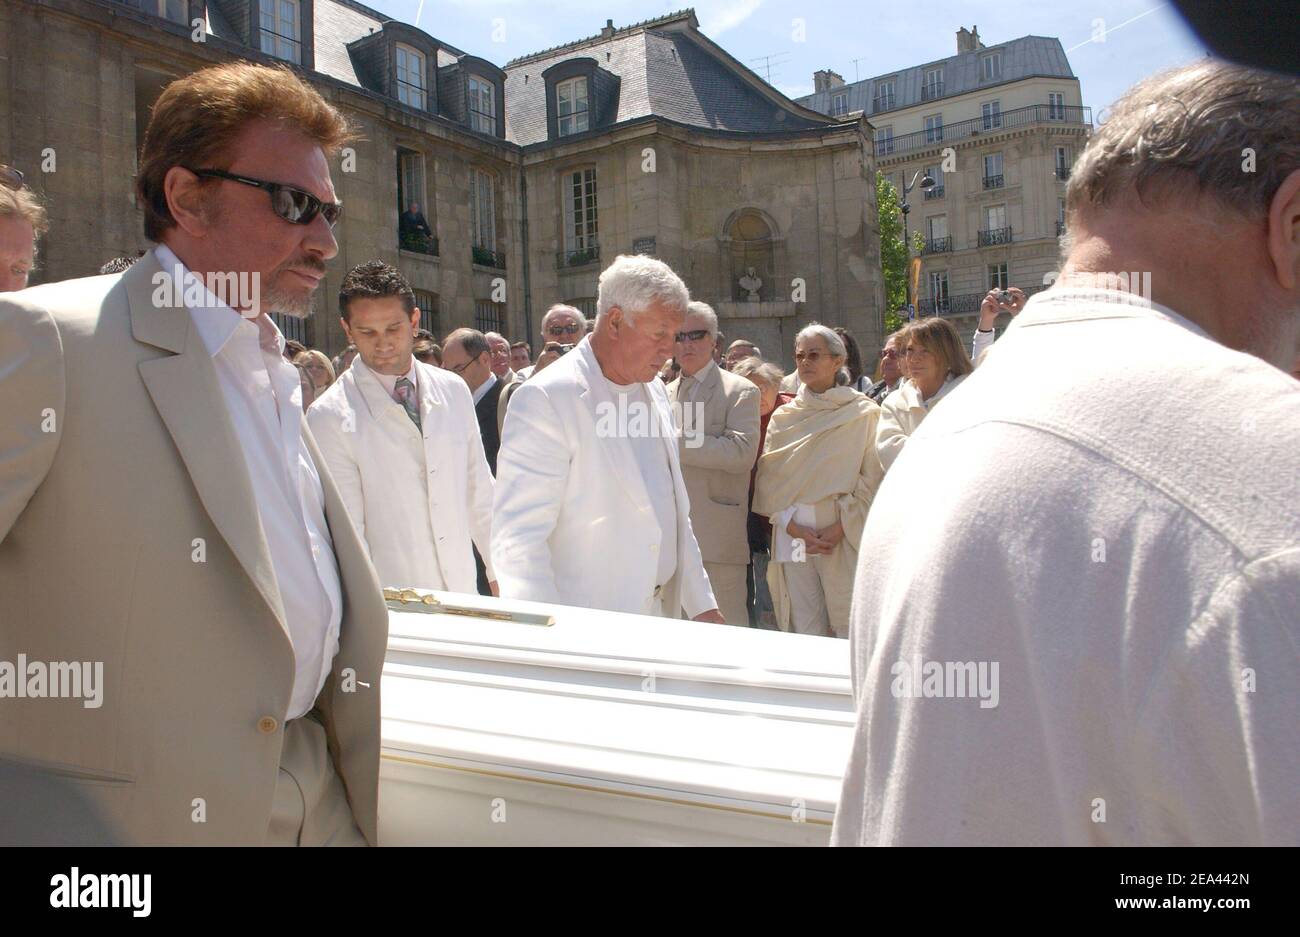 Singer Johnny Hallyday and Stephane Collaro carry the coffin at St-Germain-des-Pres church in Paris, France, on May 18, 2005, for a mass to pay a tribute to famous French music producer Eddie Barclay who died aged 84 on last Friday. Photo by Gorassini-Mousse/ABACA Stock Photo